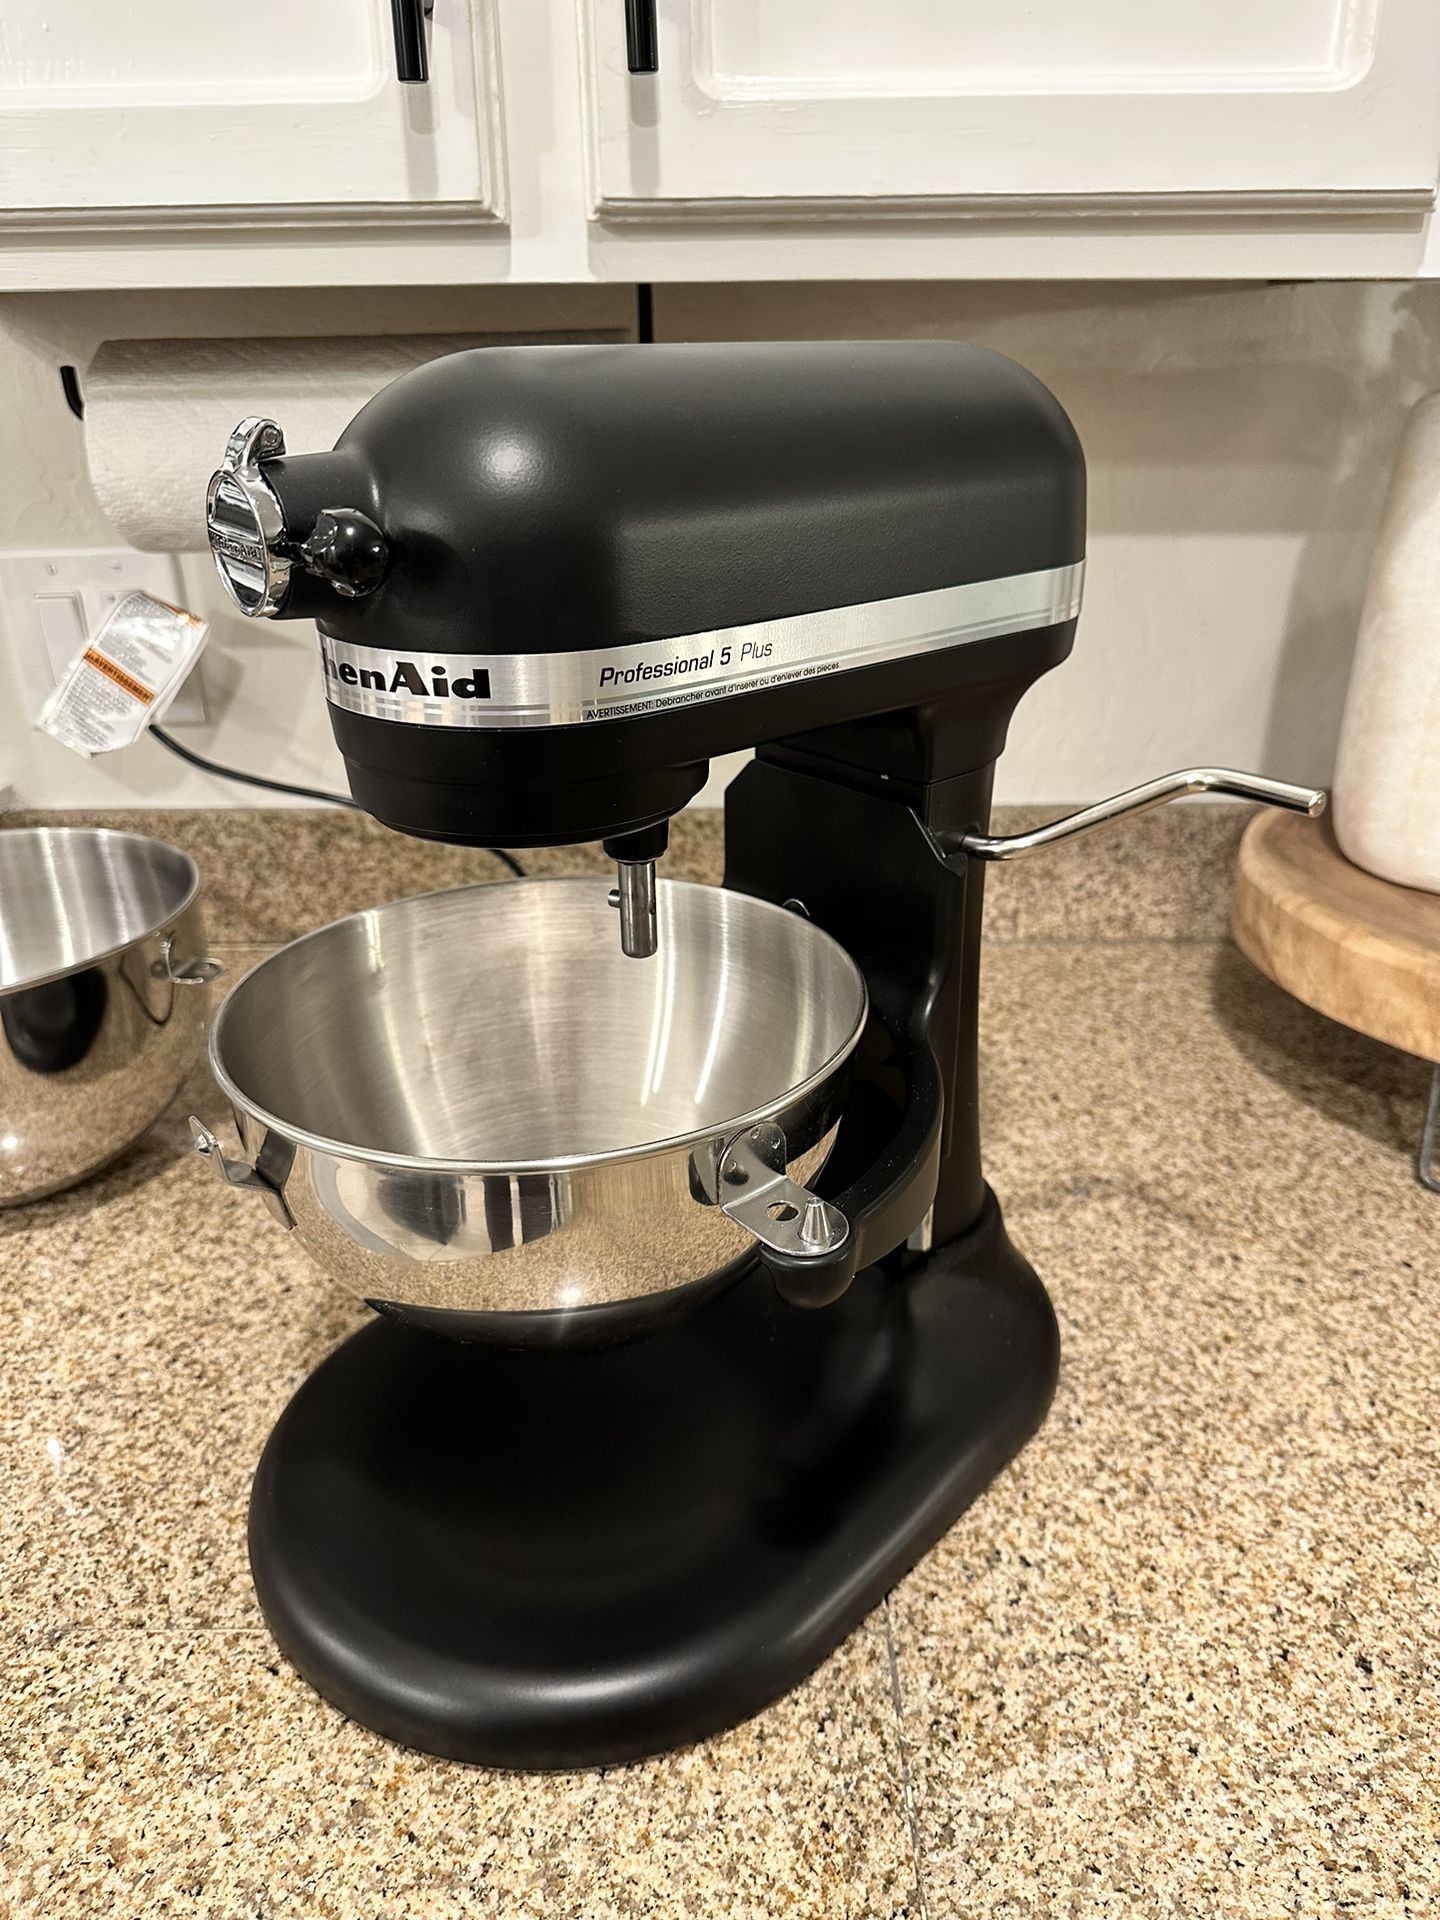 KitchenAid KSM5PSWW 5qt Stand Mixer w/ Dough Hook and 2 Metal Bowls KSM5  for Sale in Seattle, WA - OfferUp